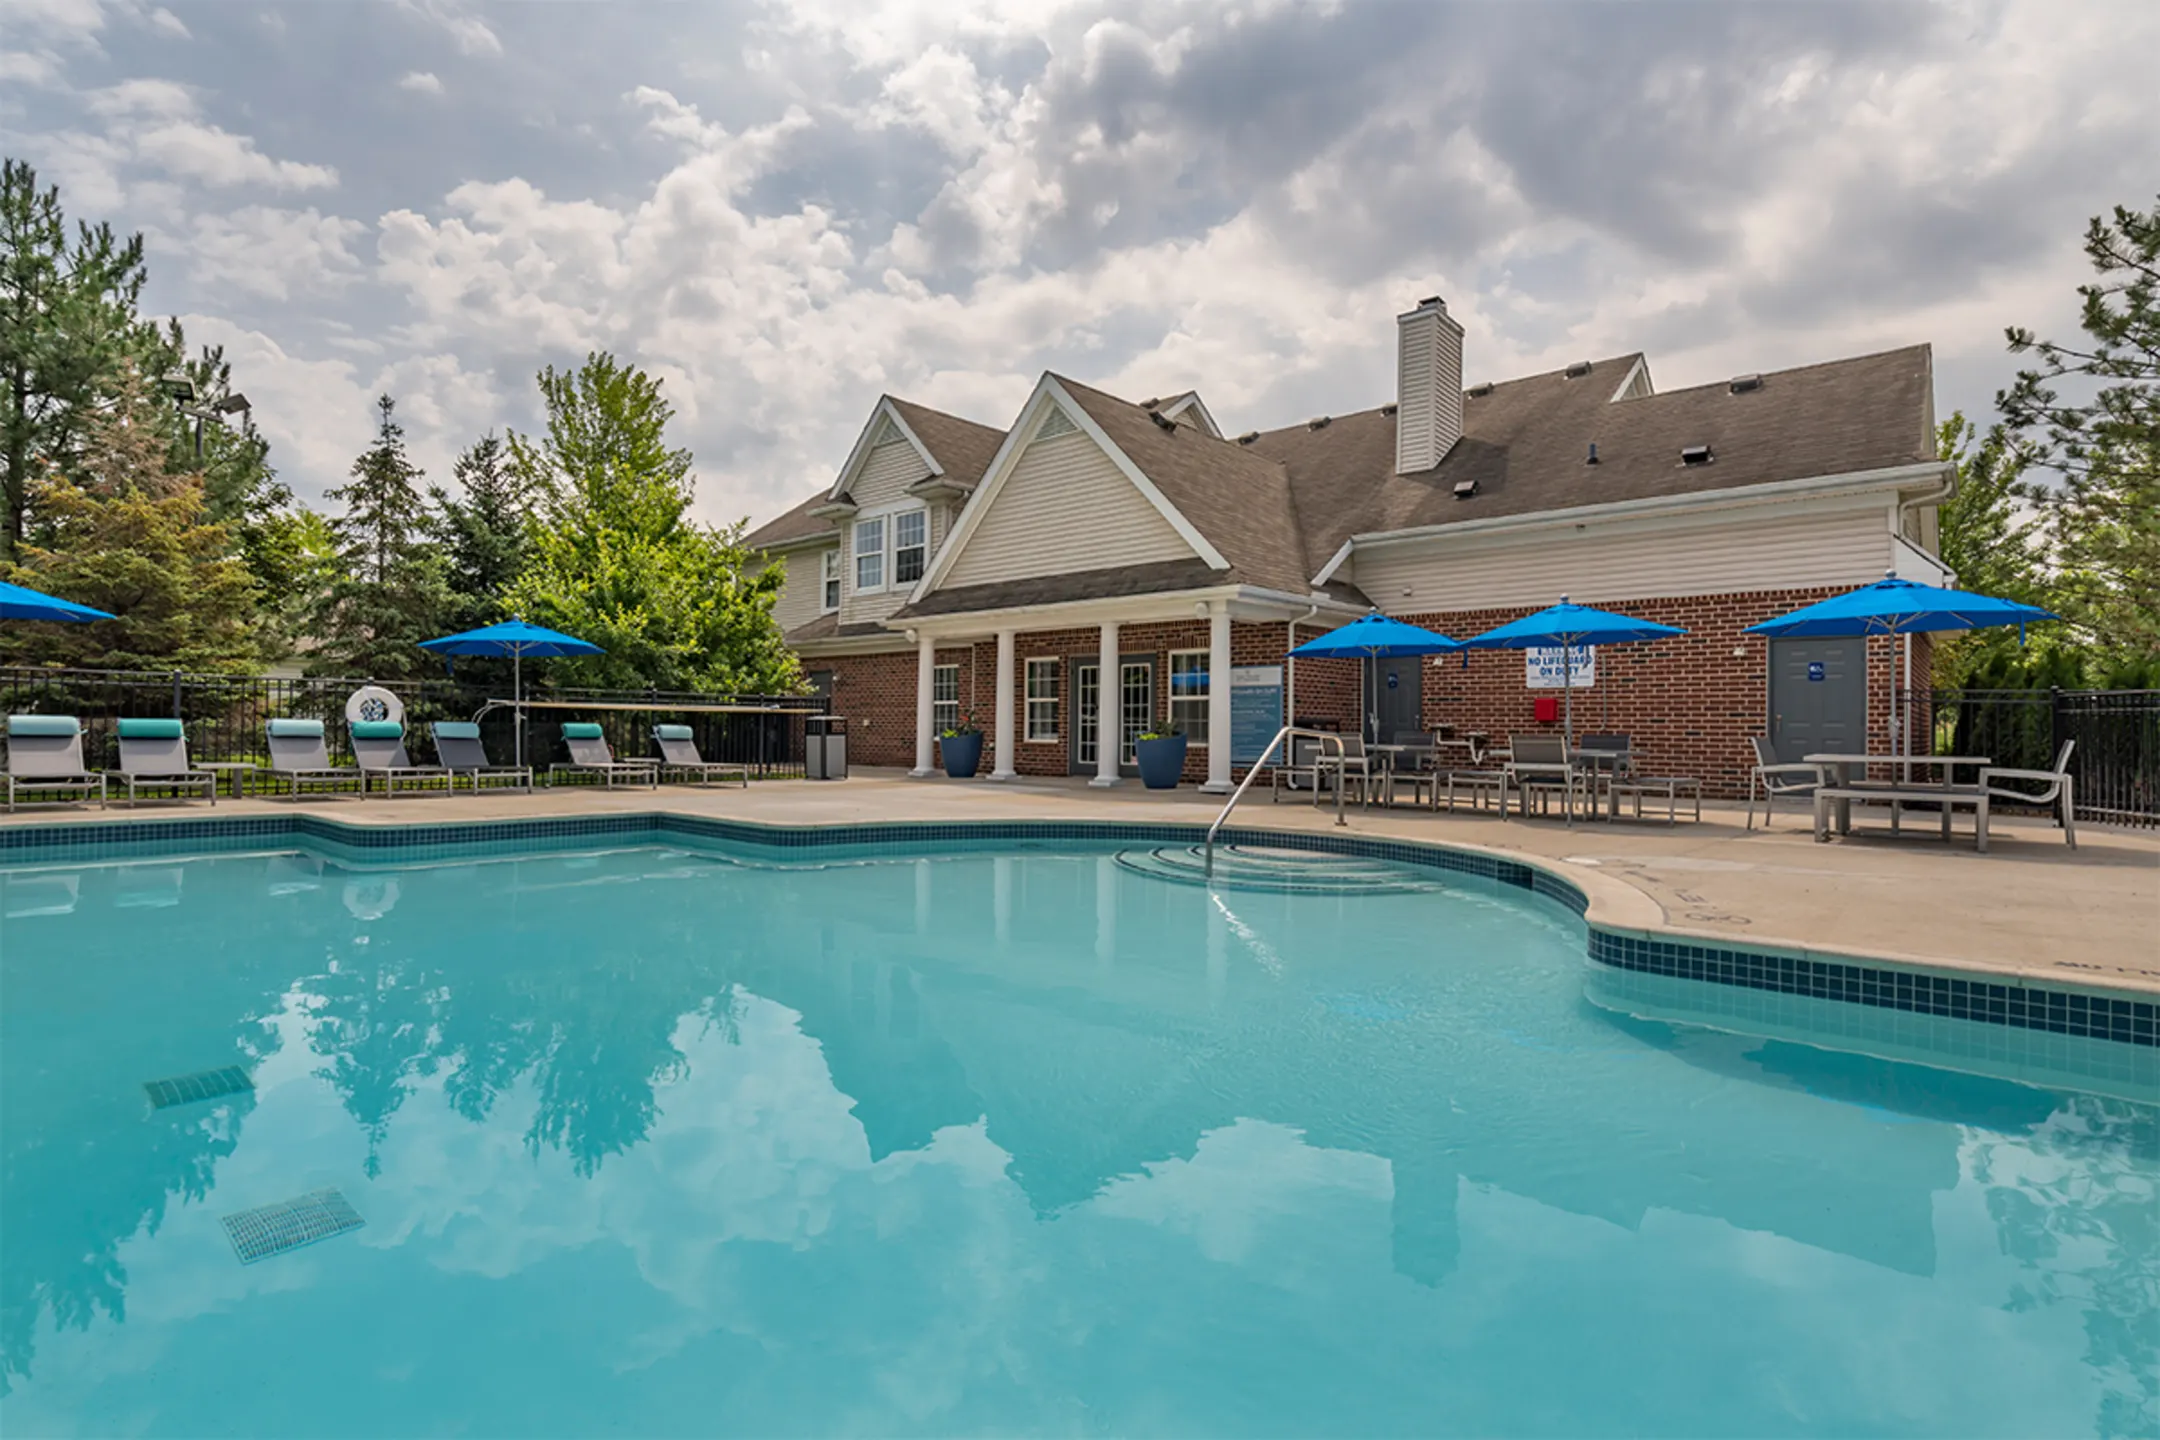 Pool - The Pointe at Canton Apartments & Townhomes - Canton, MI